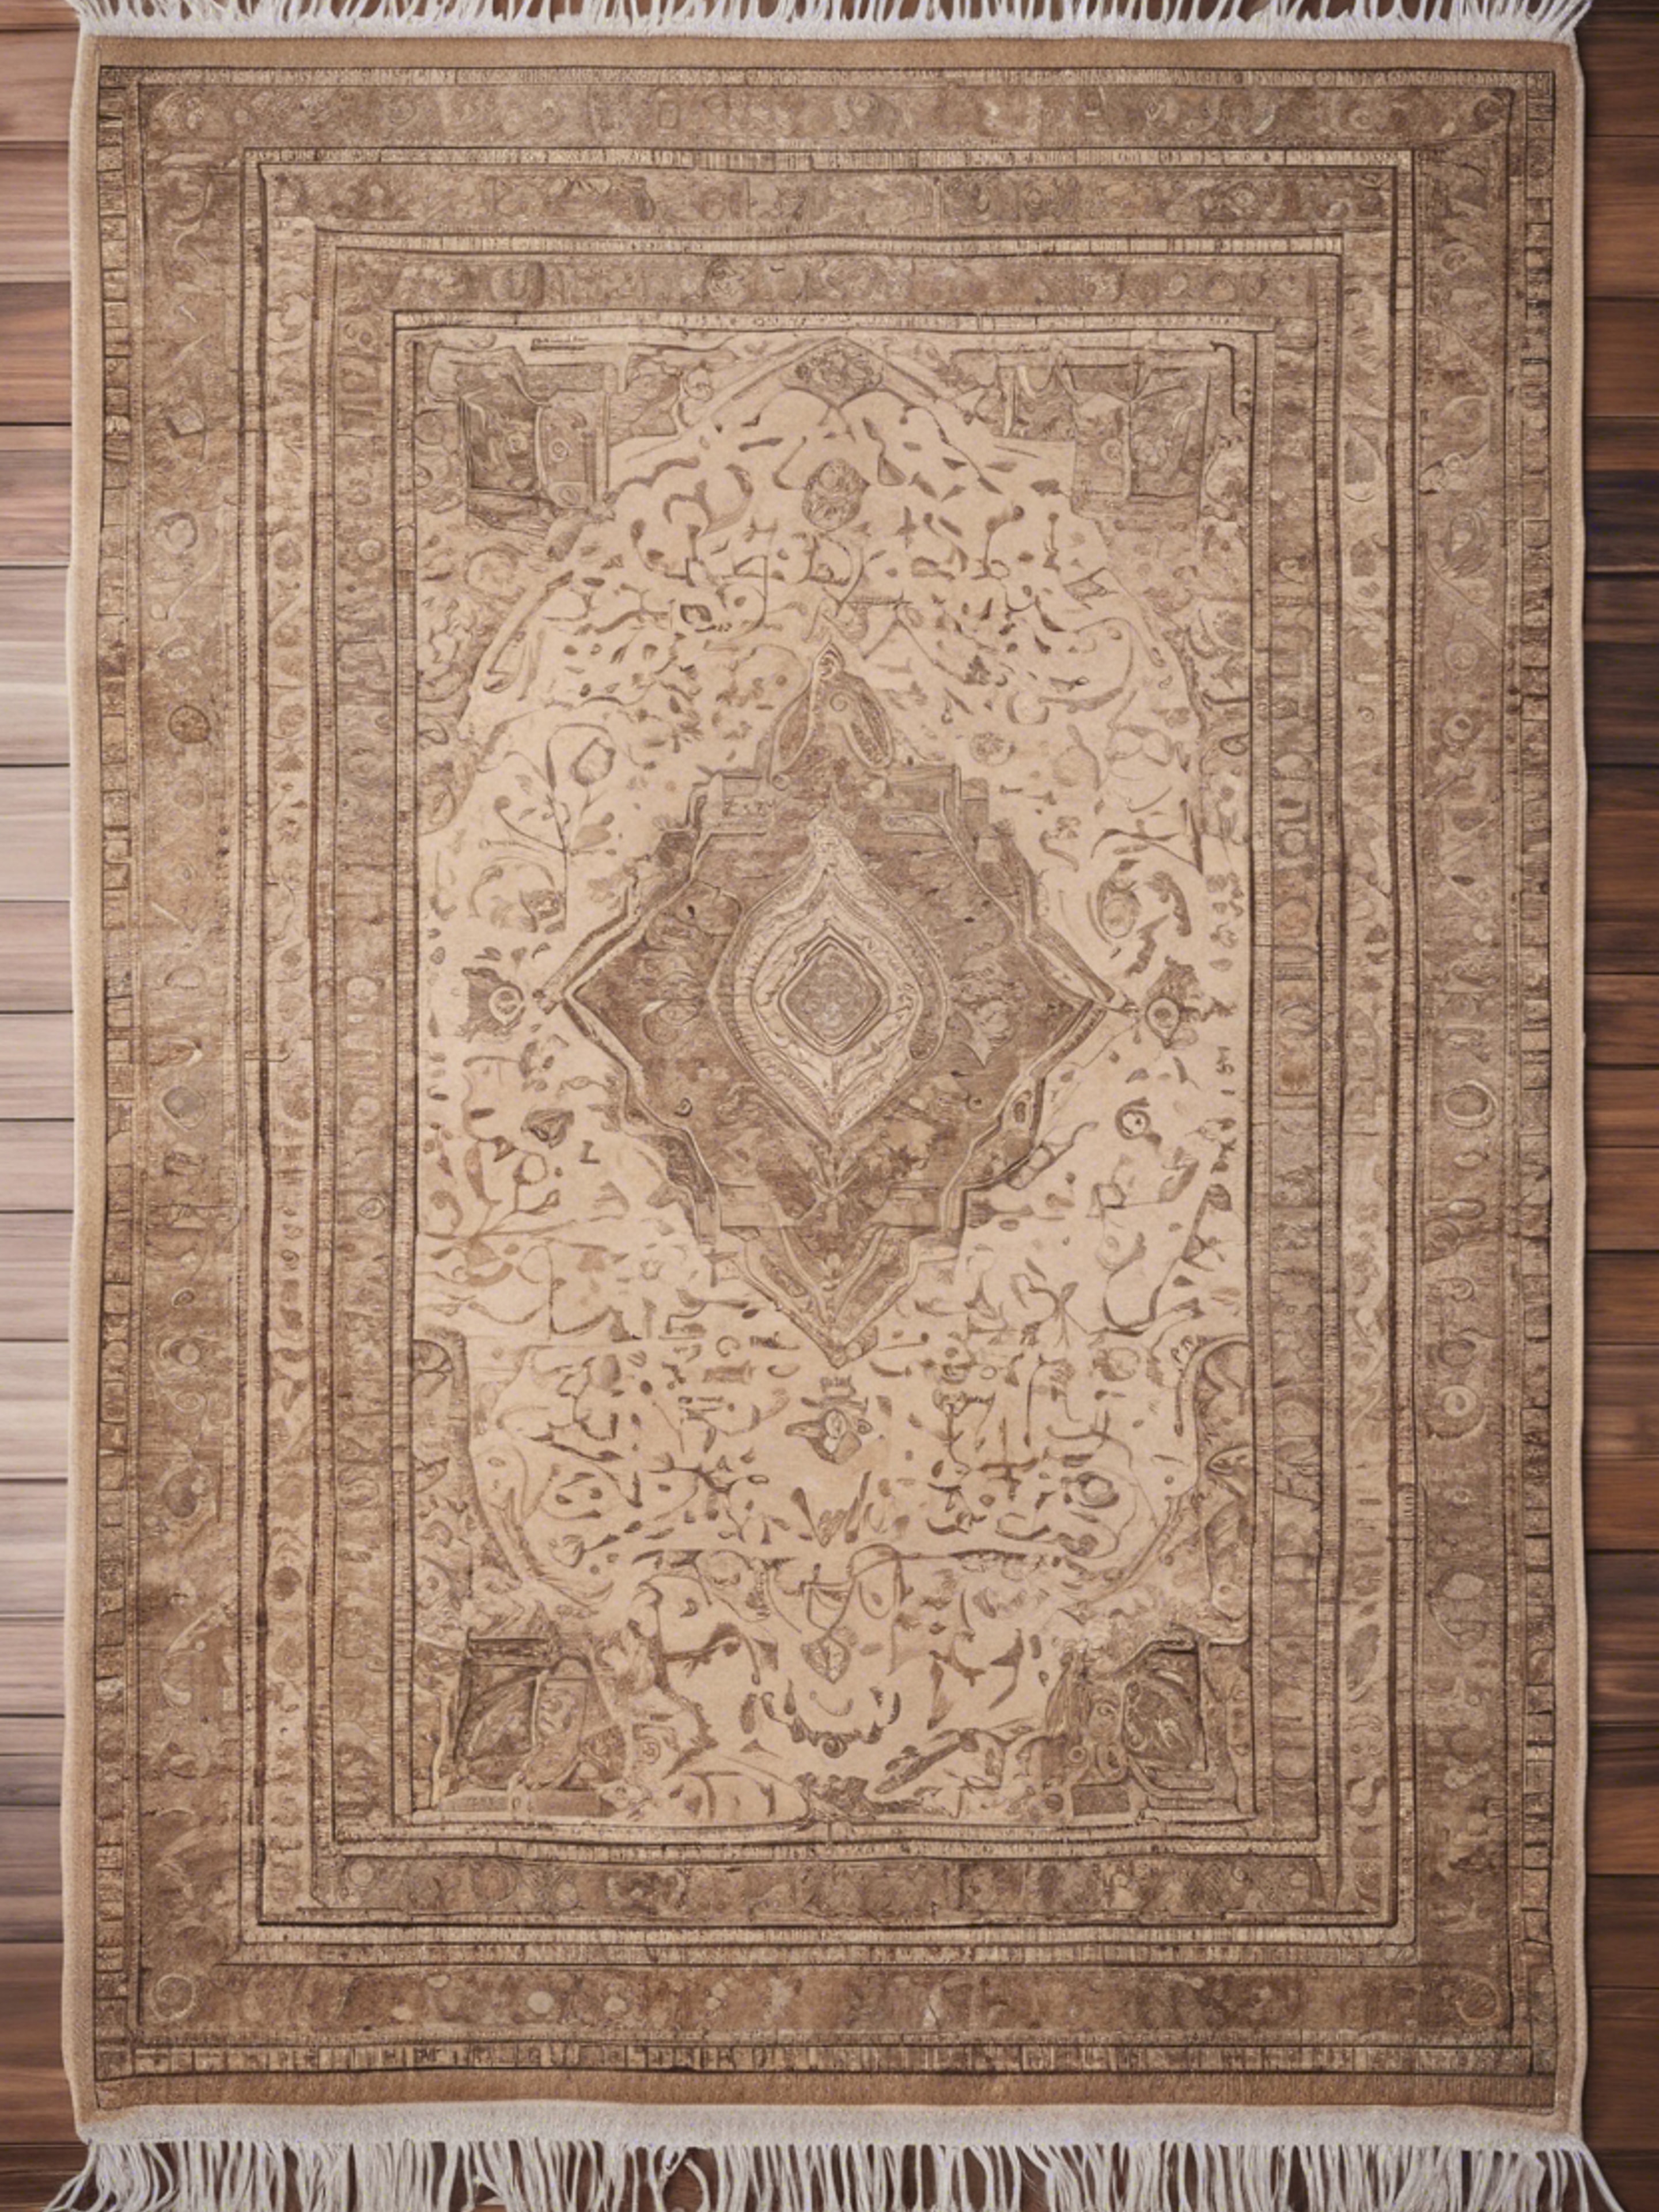 A beige Bohemian-style rug on a wooden floor.壁紙[f12c8edc66544379a33a]